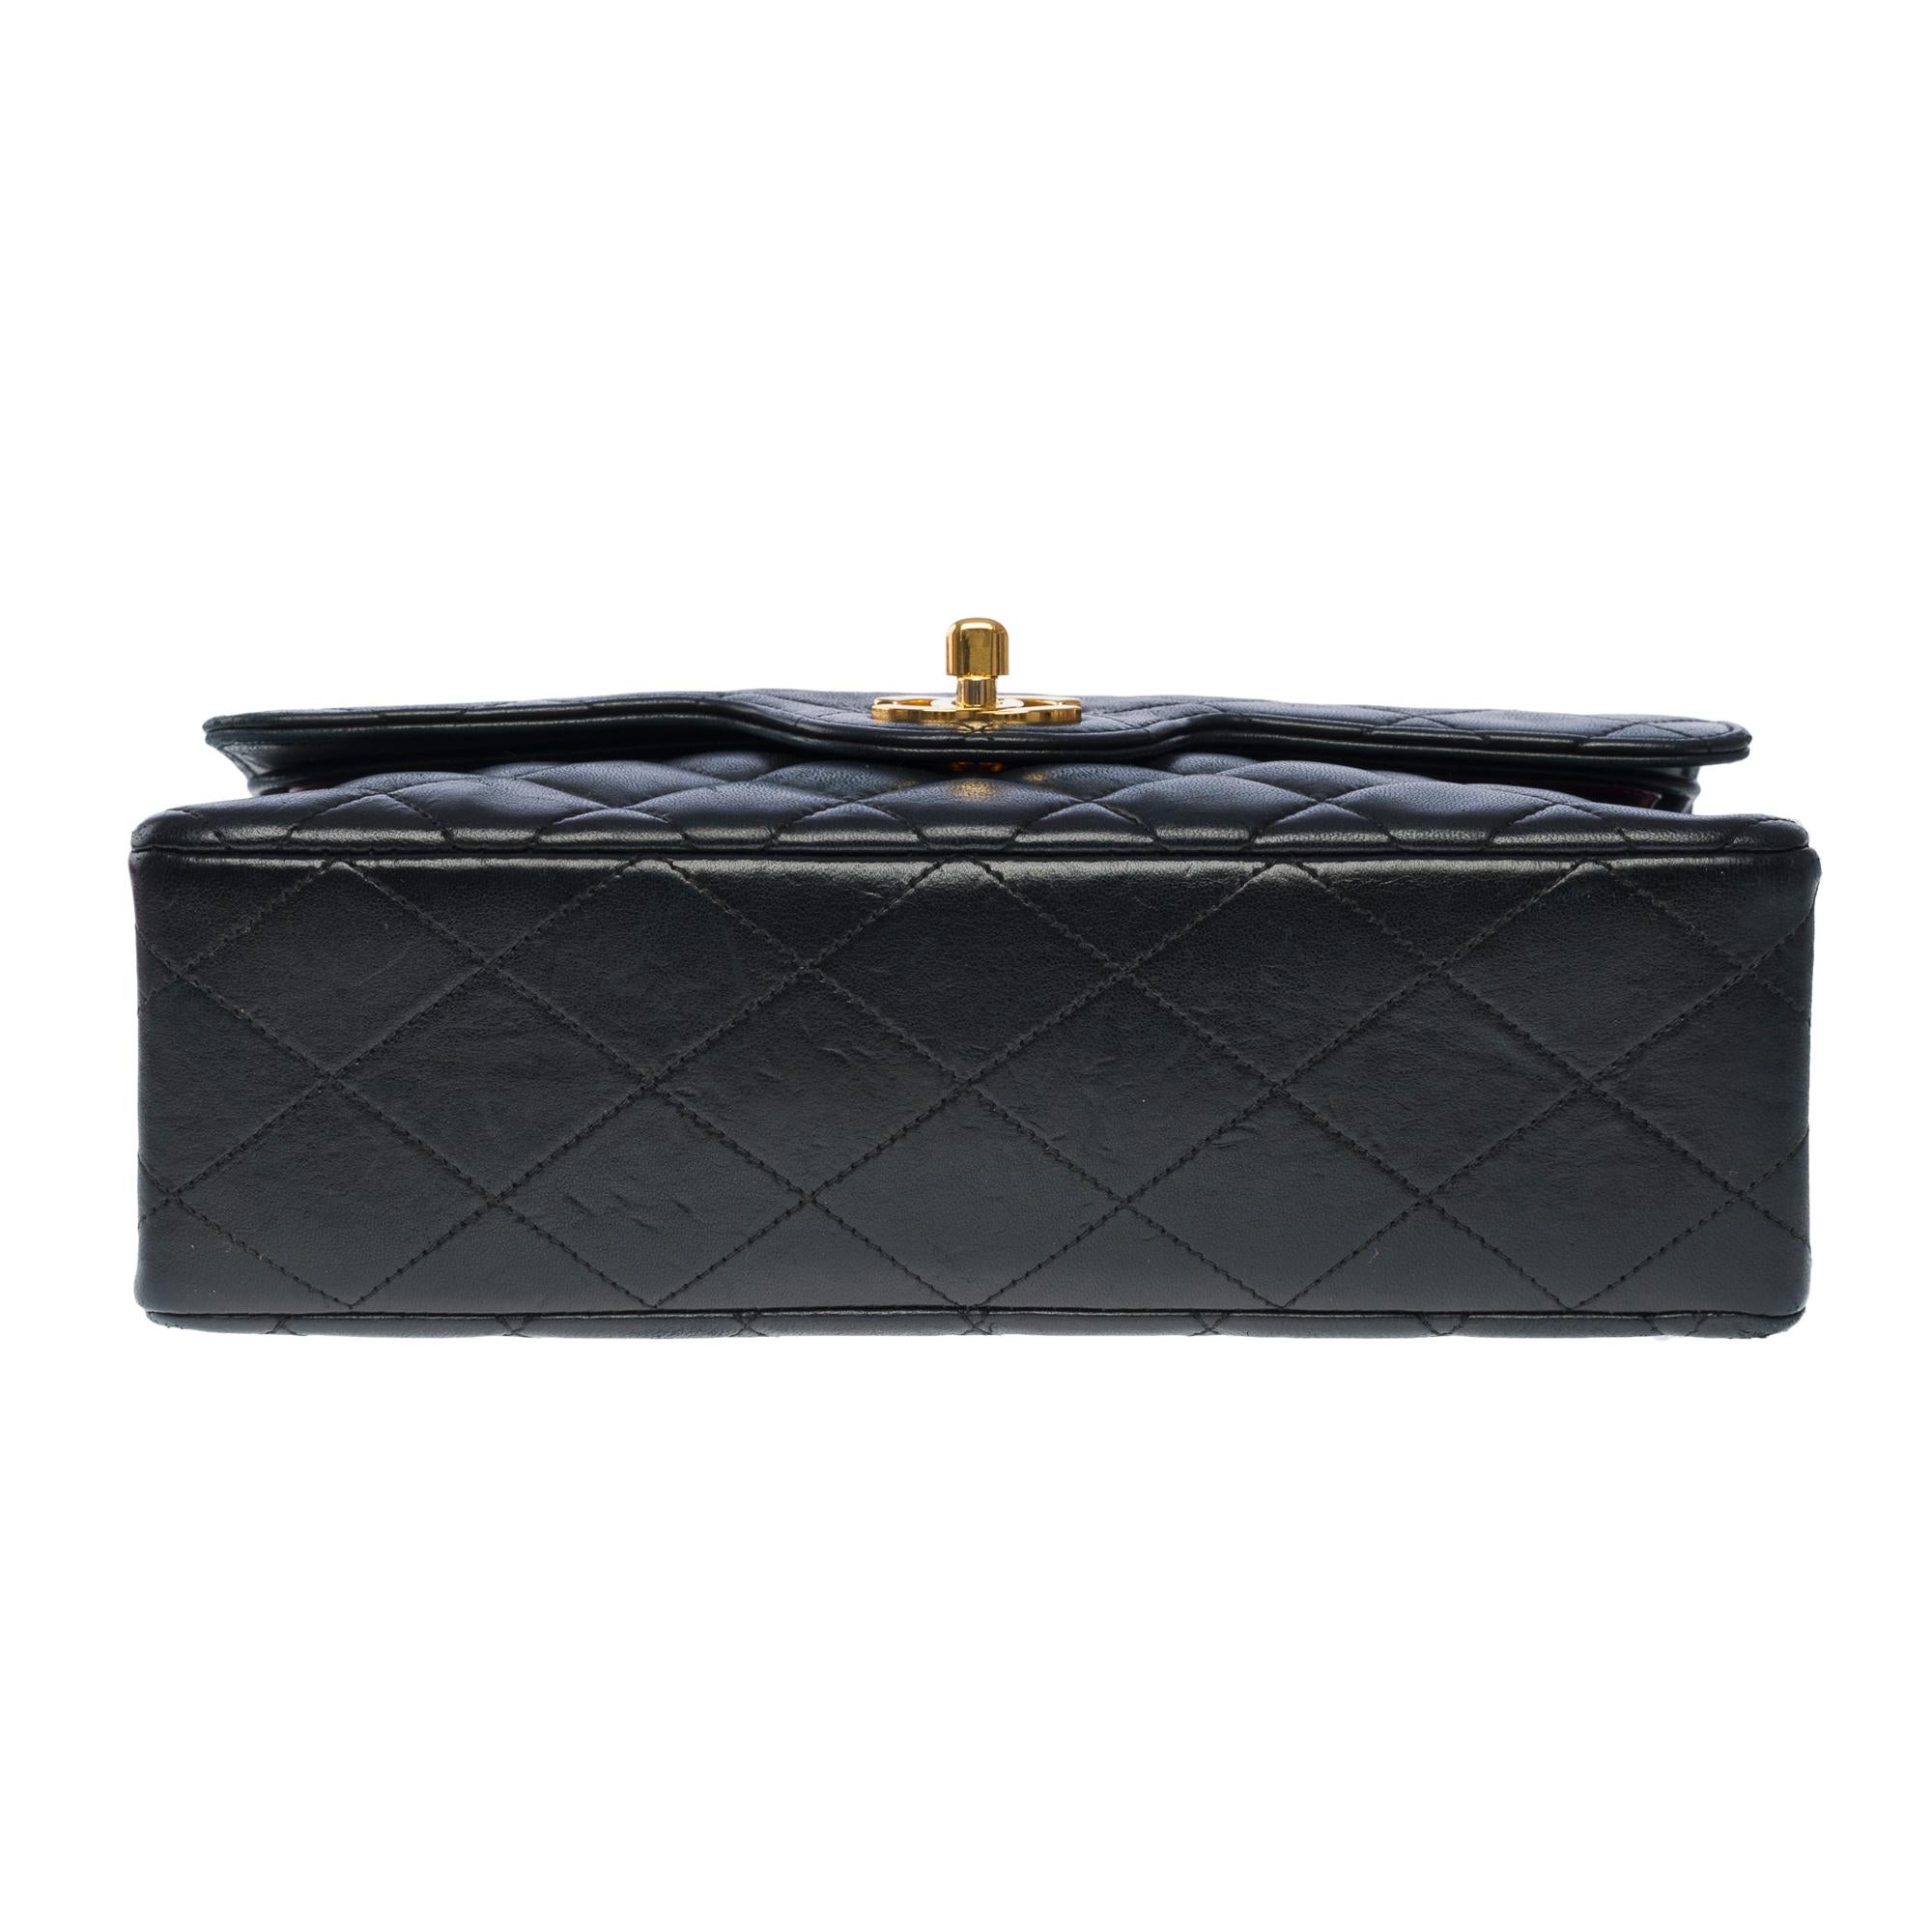 Chanel Timeless 23cm double flap shoulder bag in black quilted lambskin, GHW 7